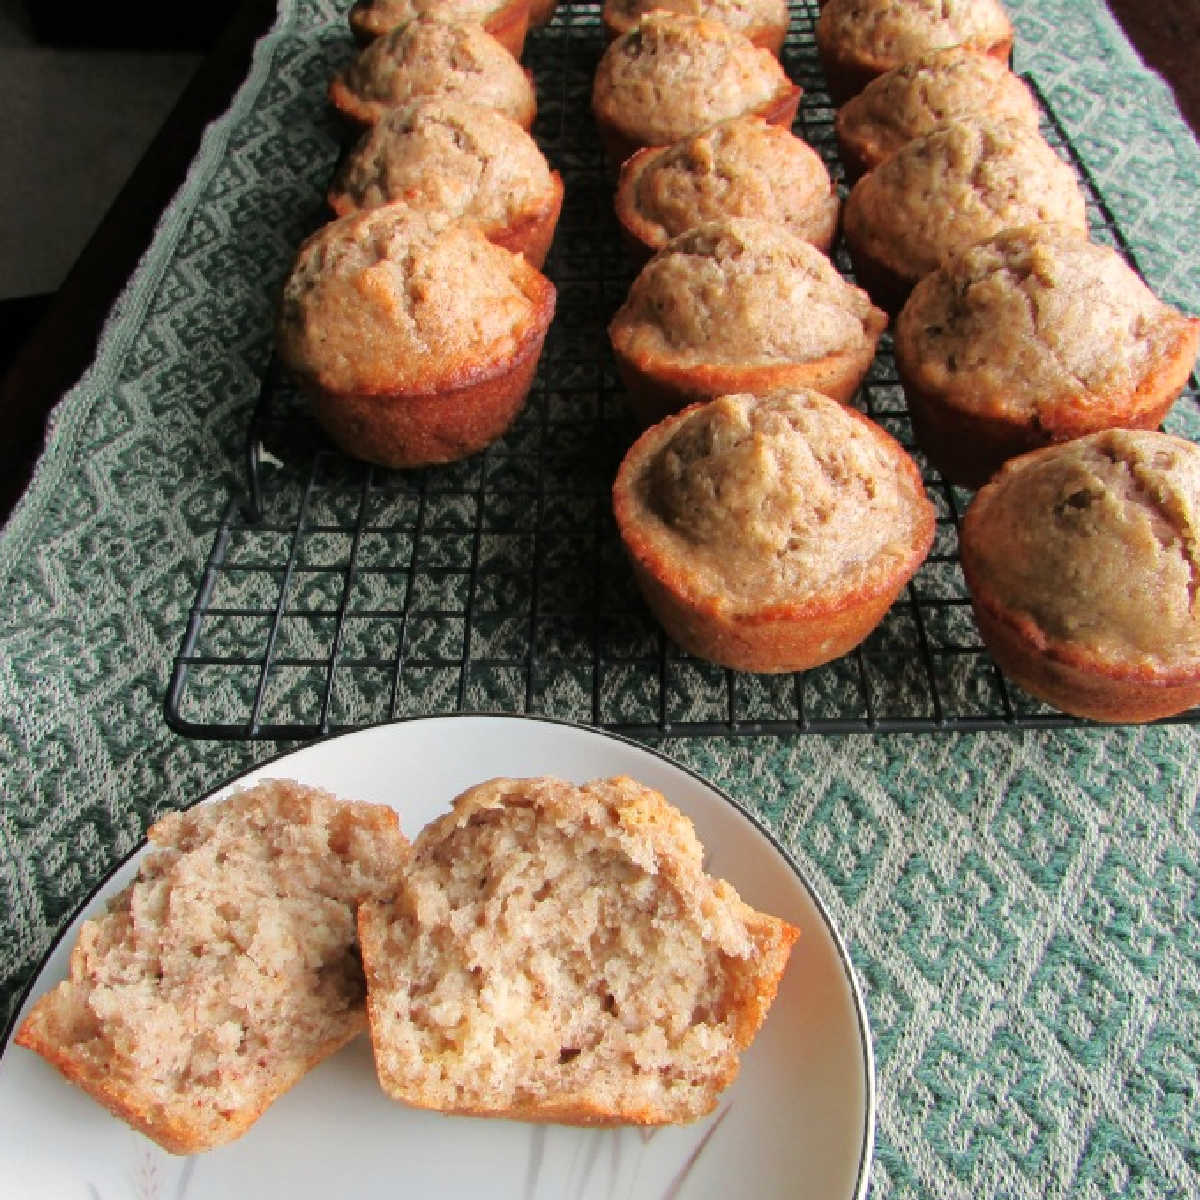 sourdough banana muffin broke in half showing soft center with more muffins on cooling rack in background. 